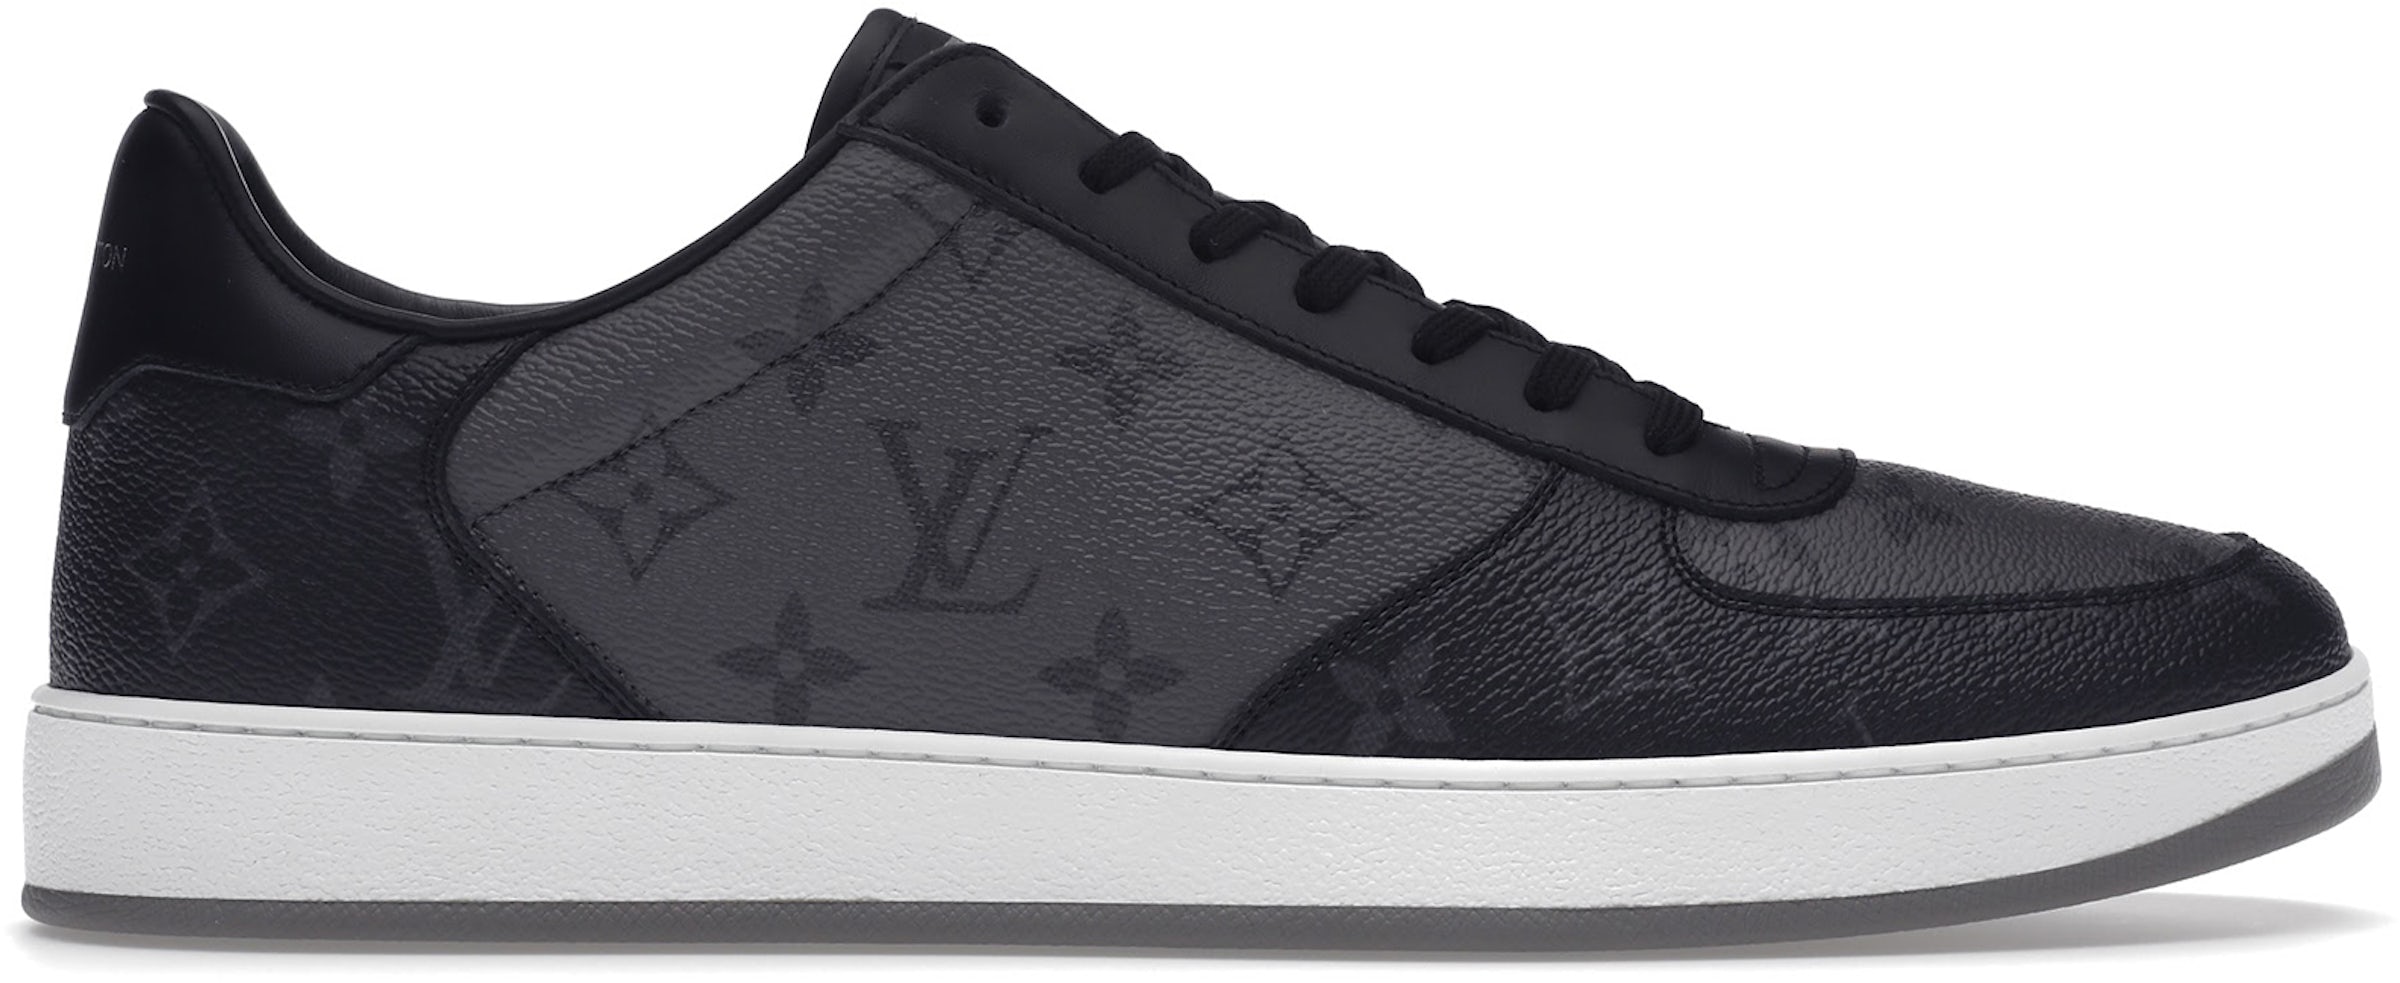 Buy Louis Vuitton Size 9 Shoes & New Sneakers - StockX